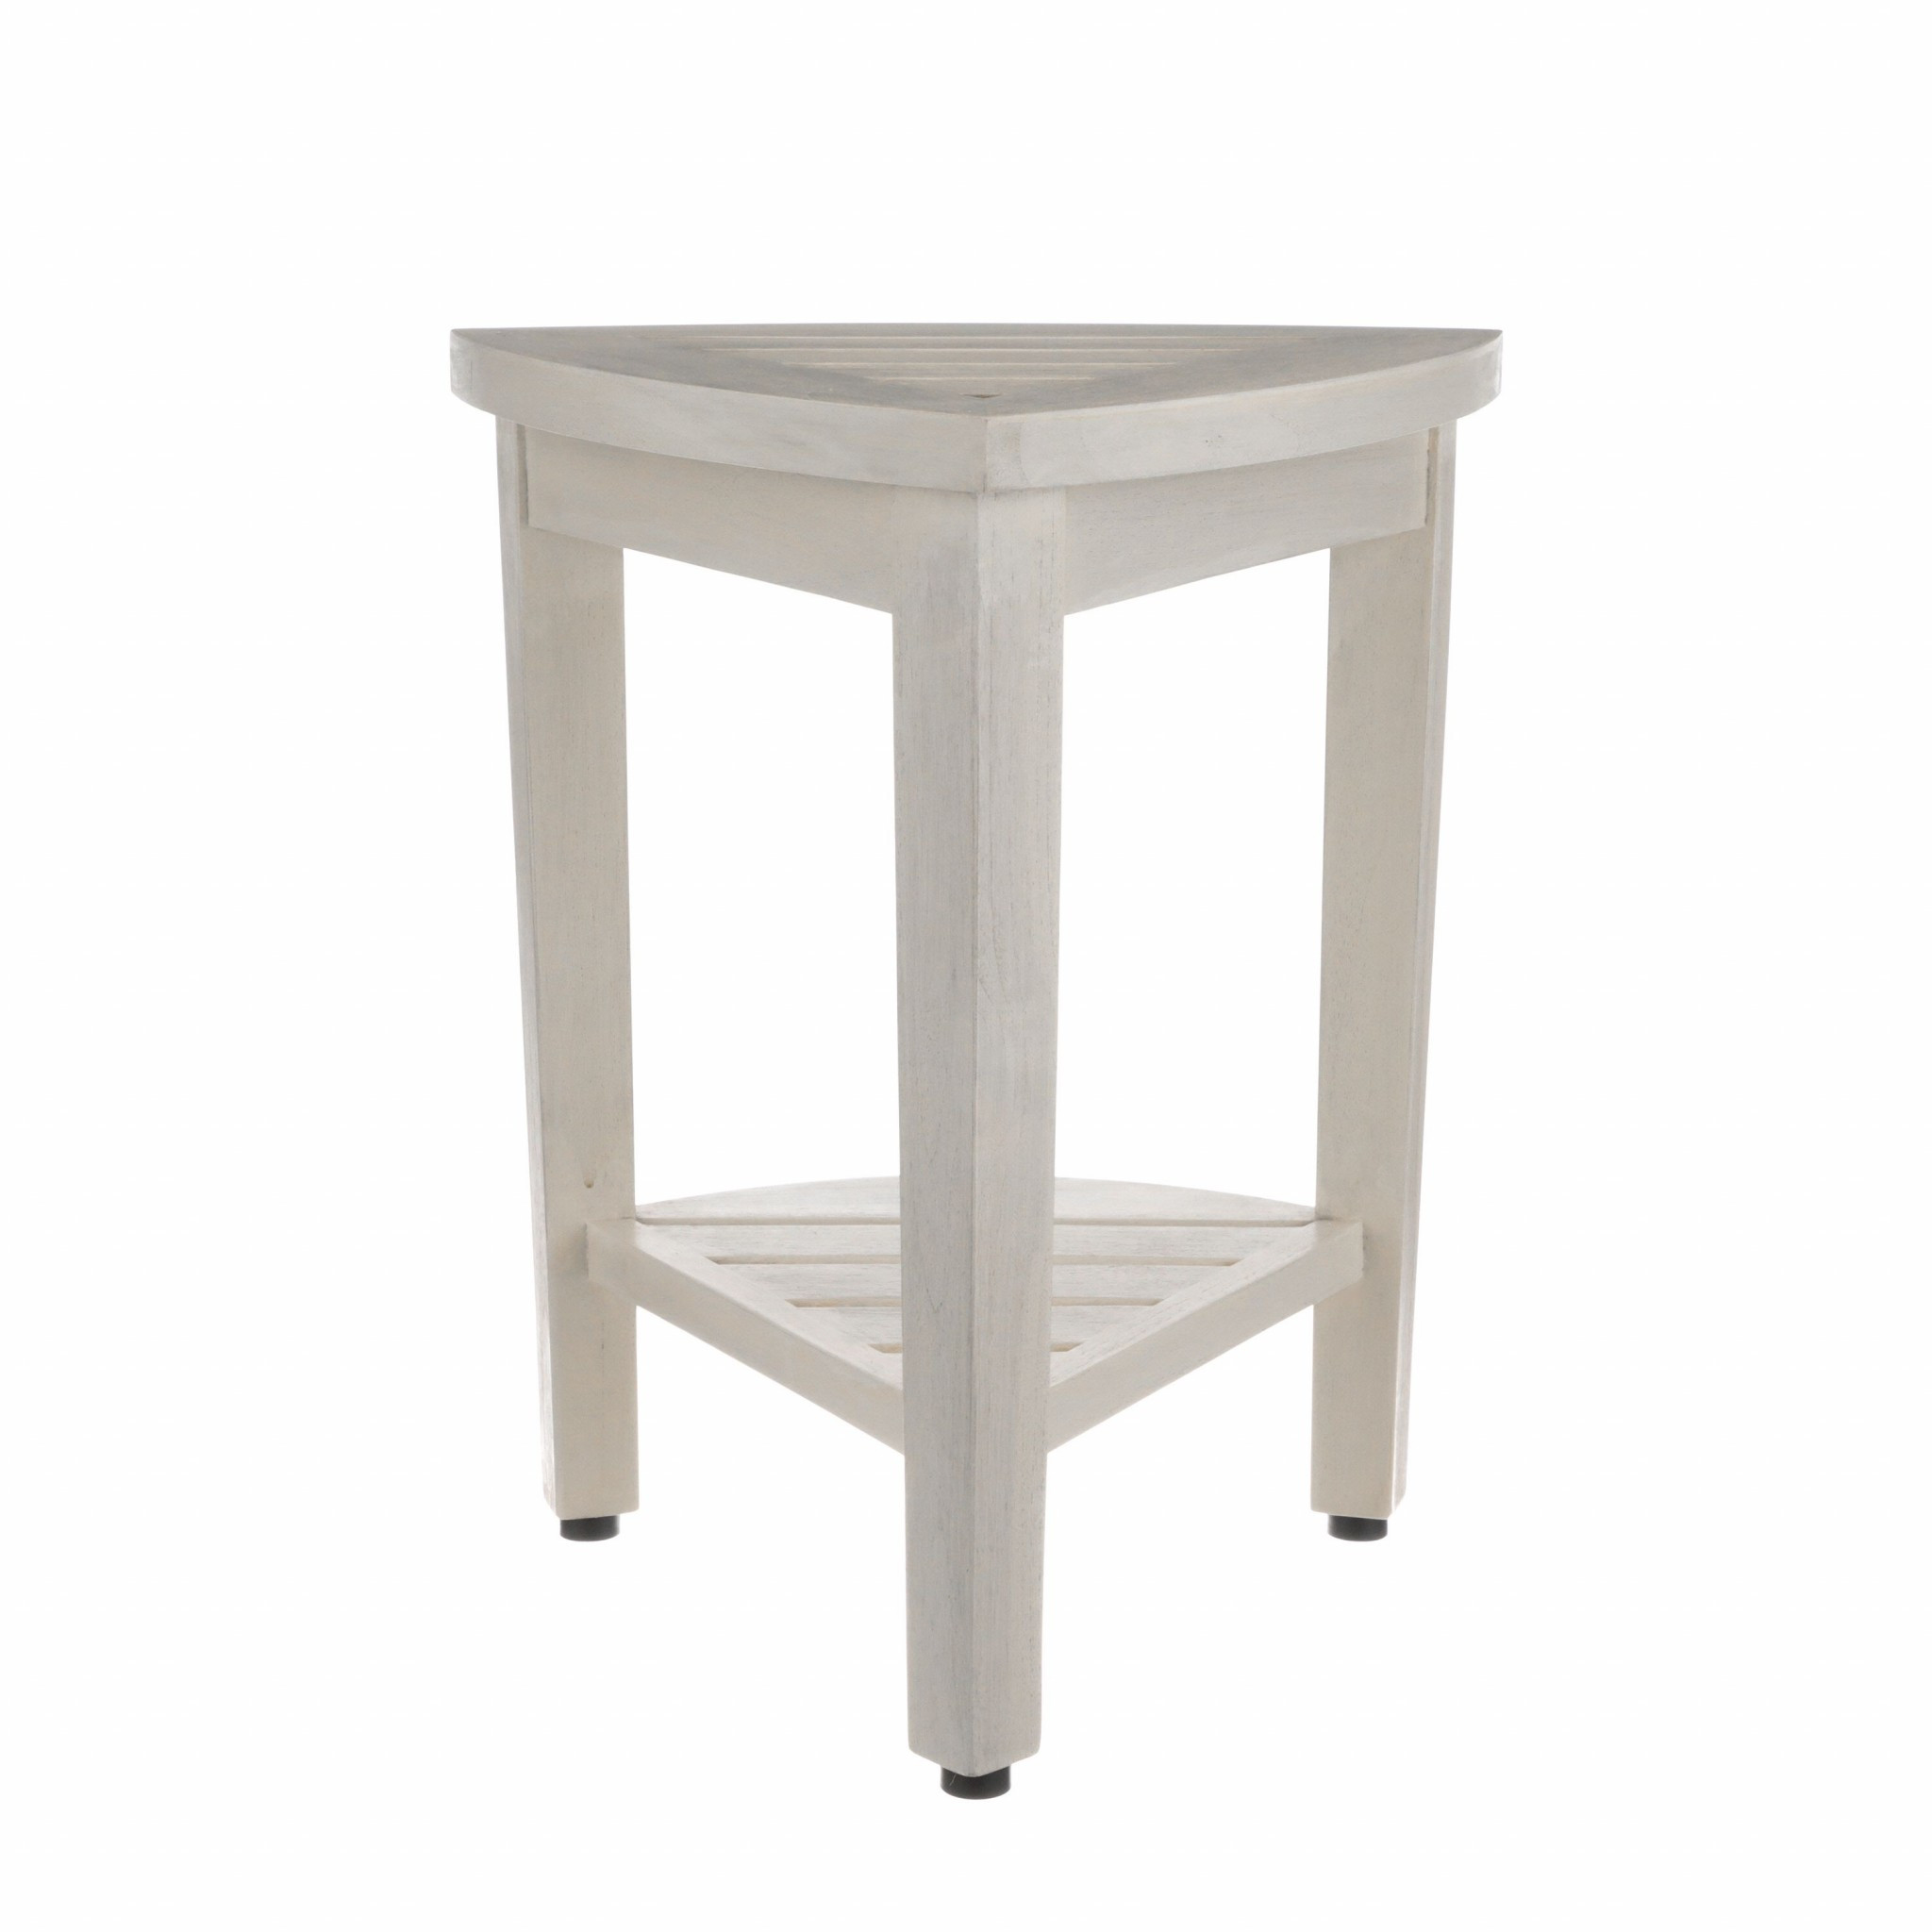 Compact Teak Shower Stool with Arms in Whitewash Finish